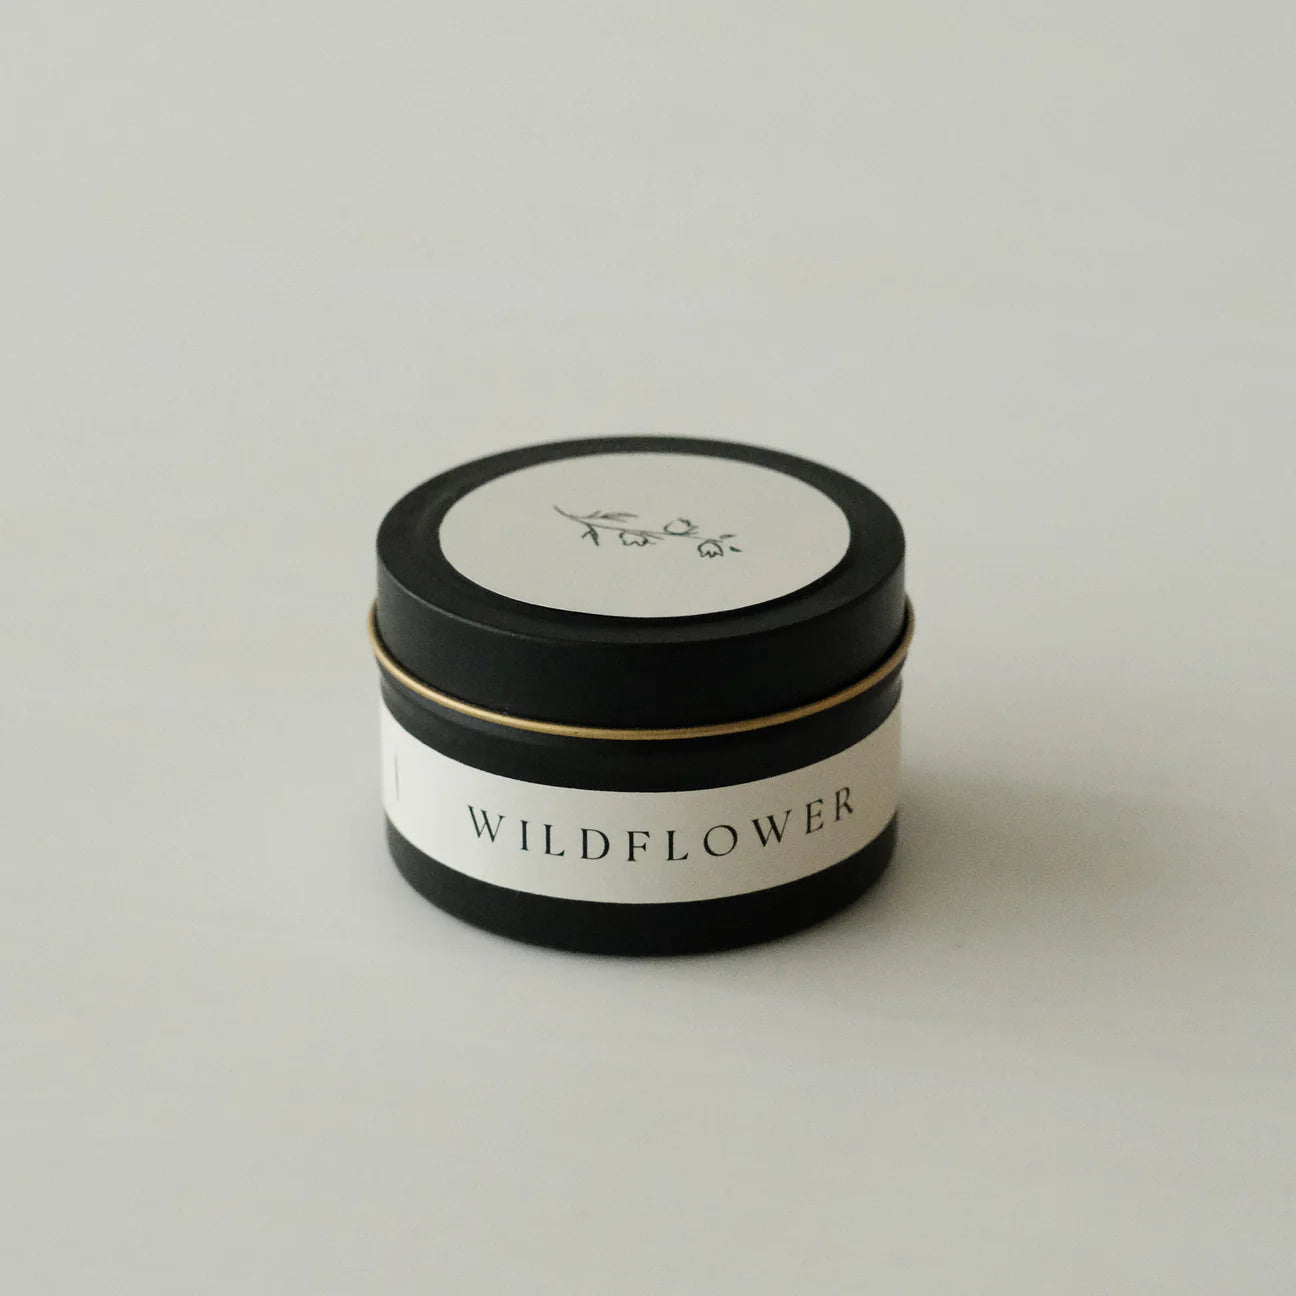 Soy Wax Scented Candle Tin